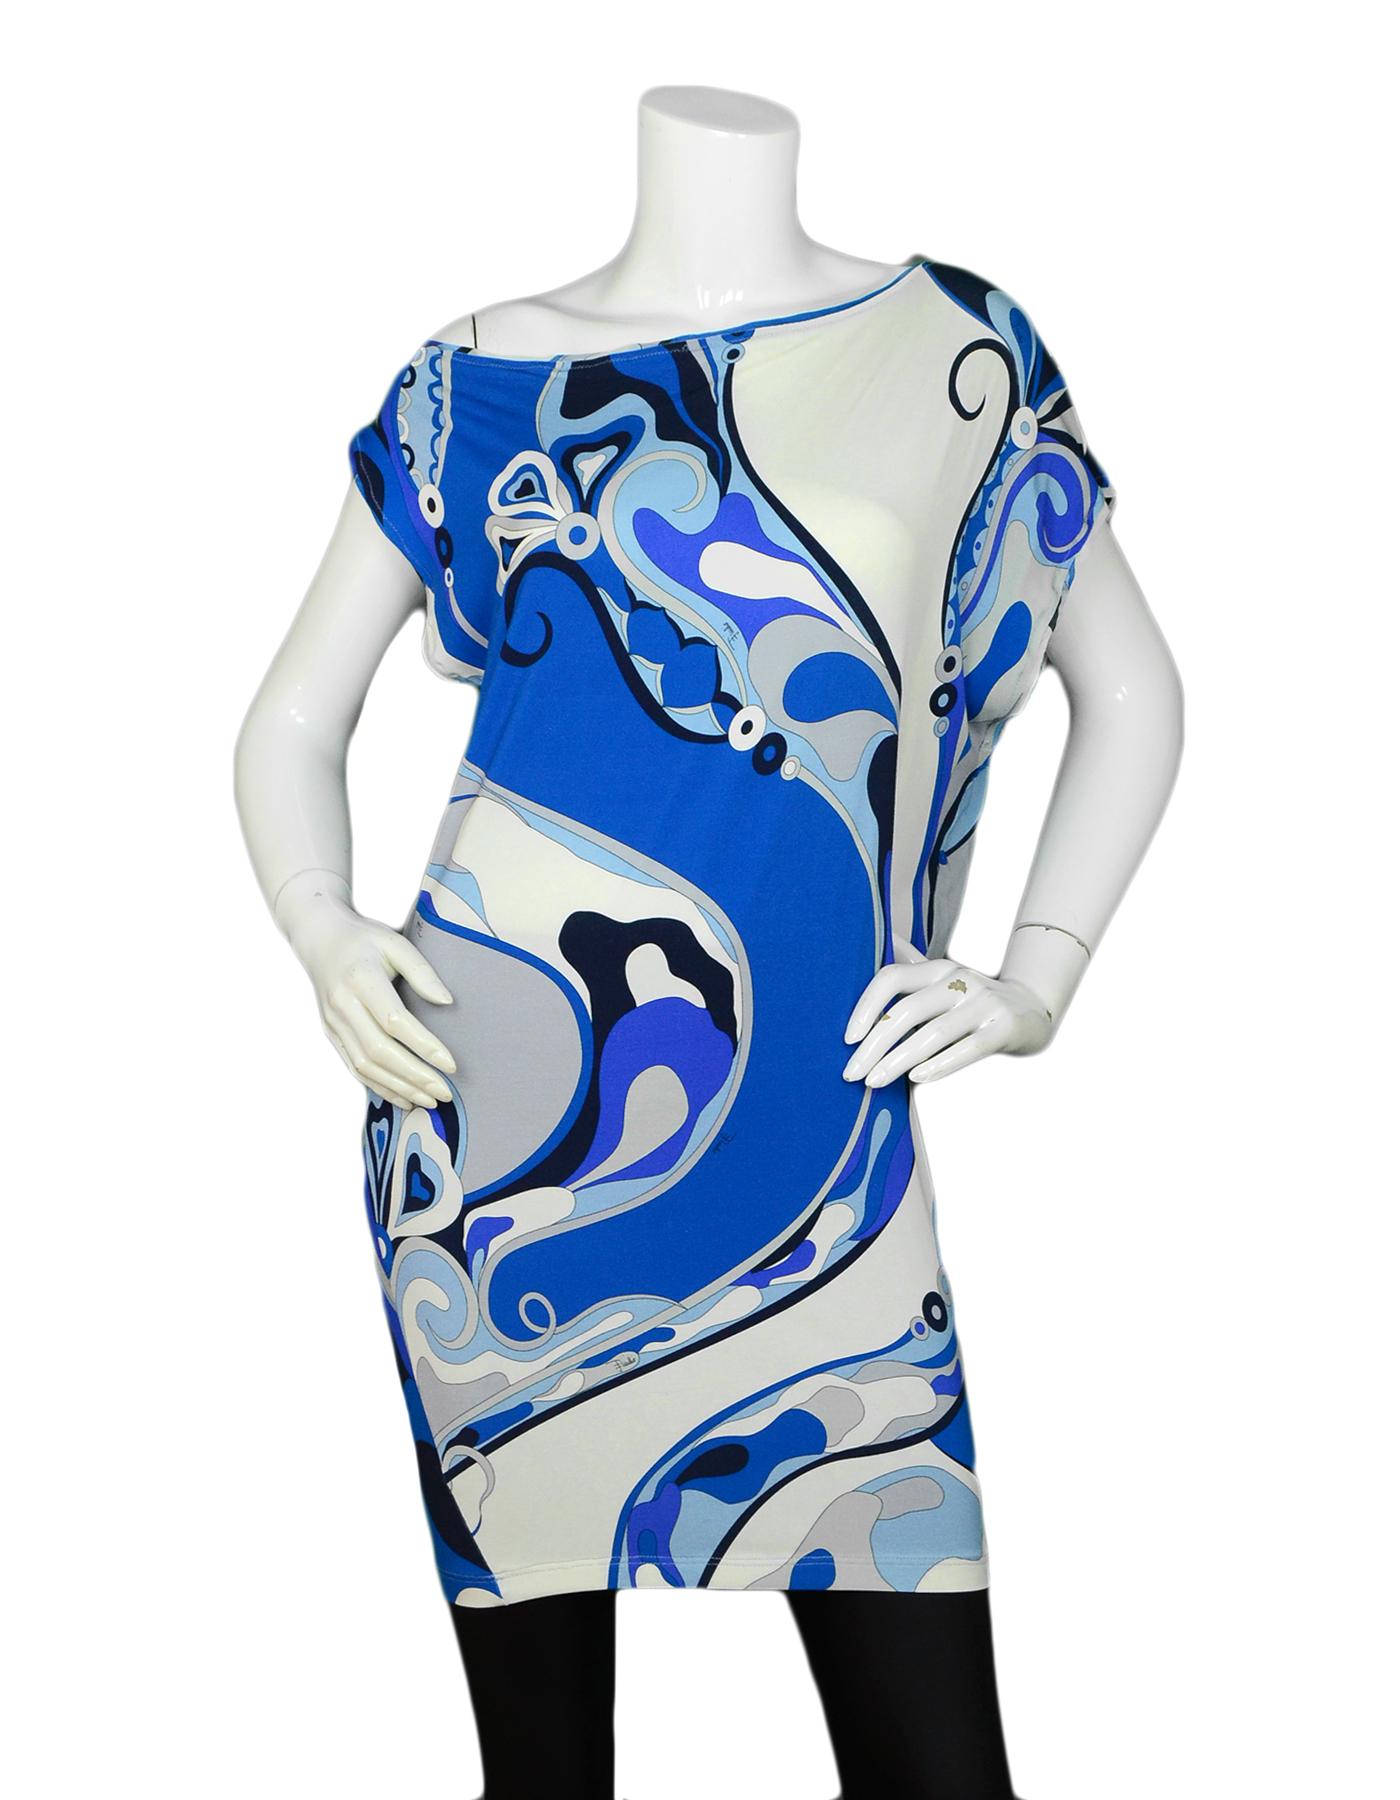 Emilio Pucci Blue White Abstract Print Asymmetrical Tunic Top sz 4

Made In: Italy
Year of Production: 
Color: Blue, White
Materials: 90% Rayon, 10% Elastane
Lining: 90% Rayon, 10% Elastane
Opening/Closure: Slip on
Overall Condition: Excellent